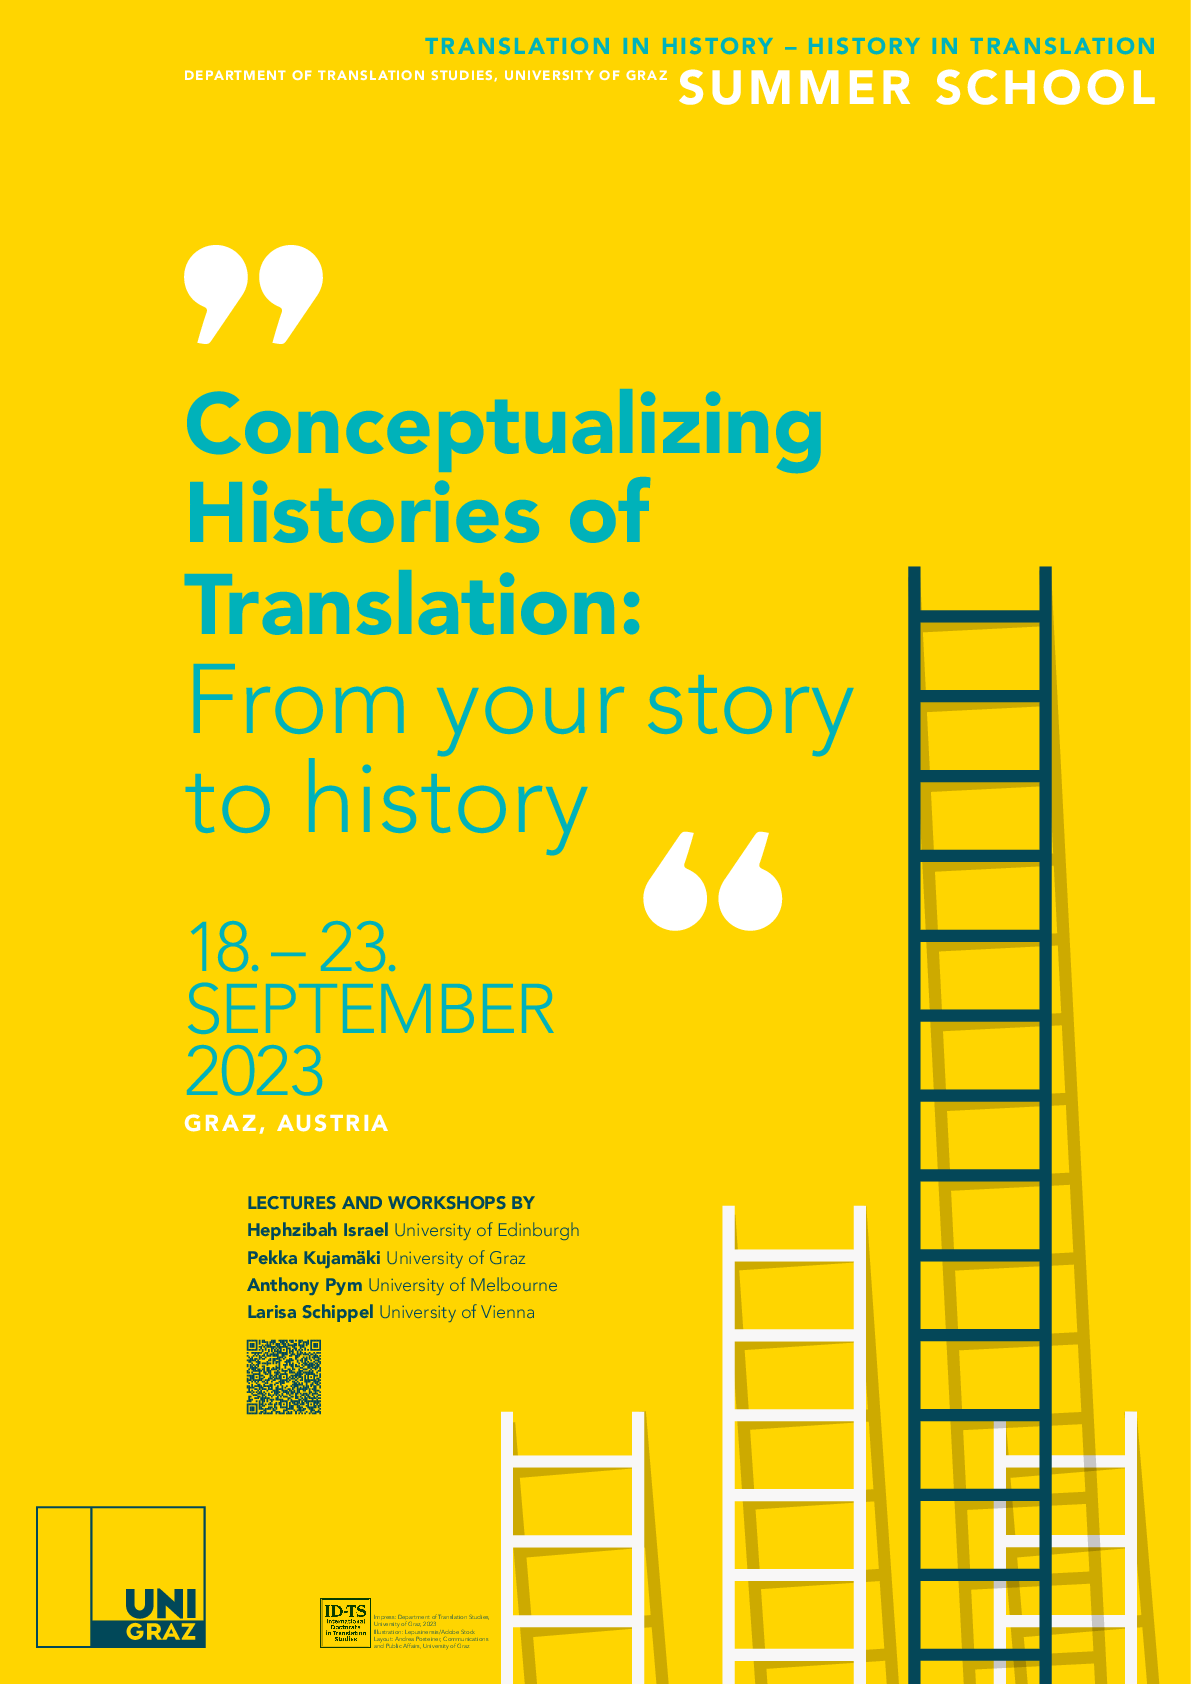 Poster for the Summer School: Conceptualizing Histories of Translation (2023) at the Department of Translation Studies, University of Graz 